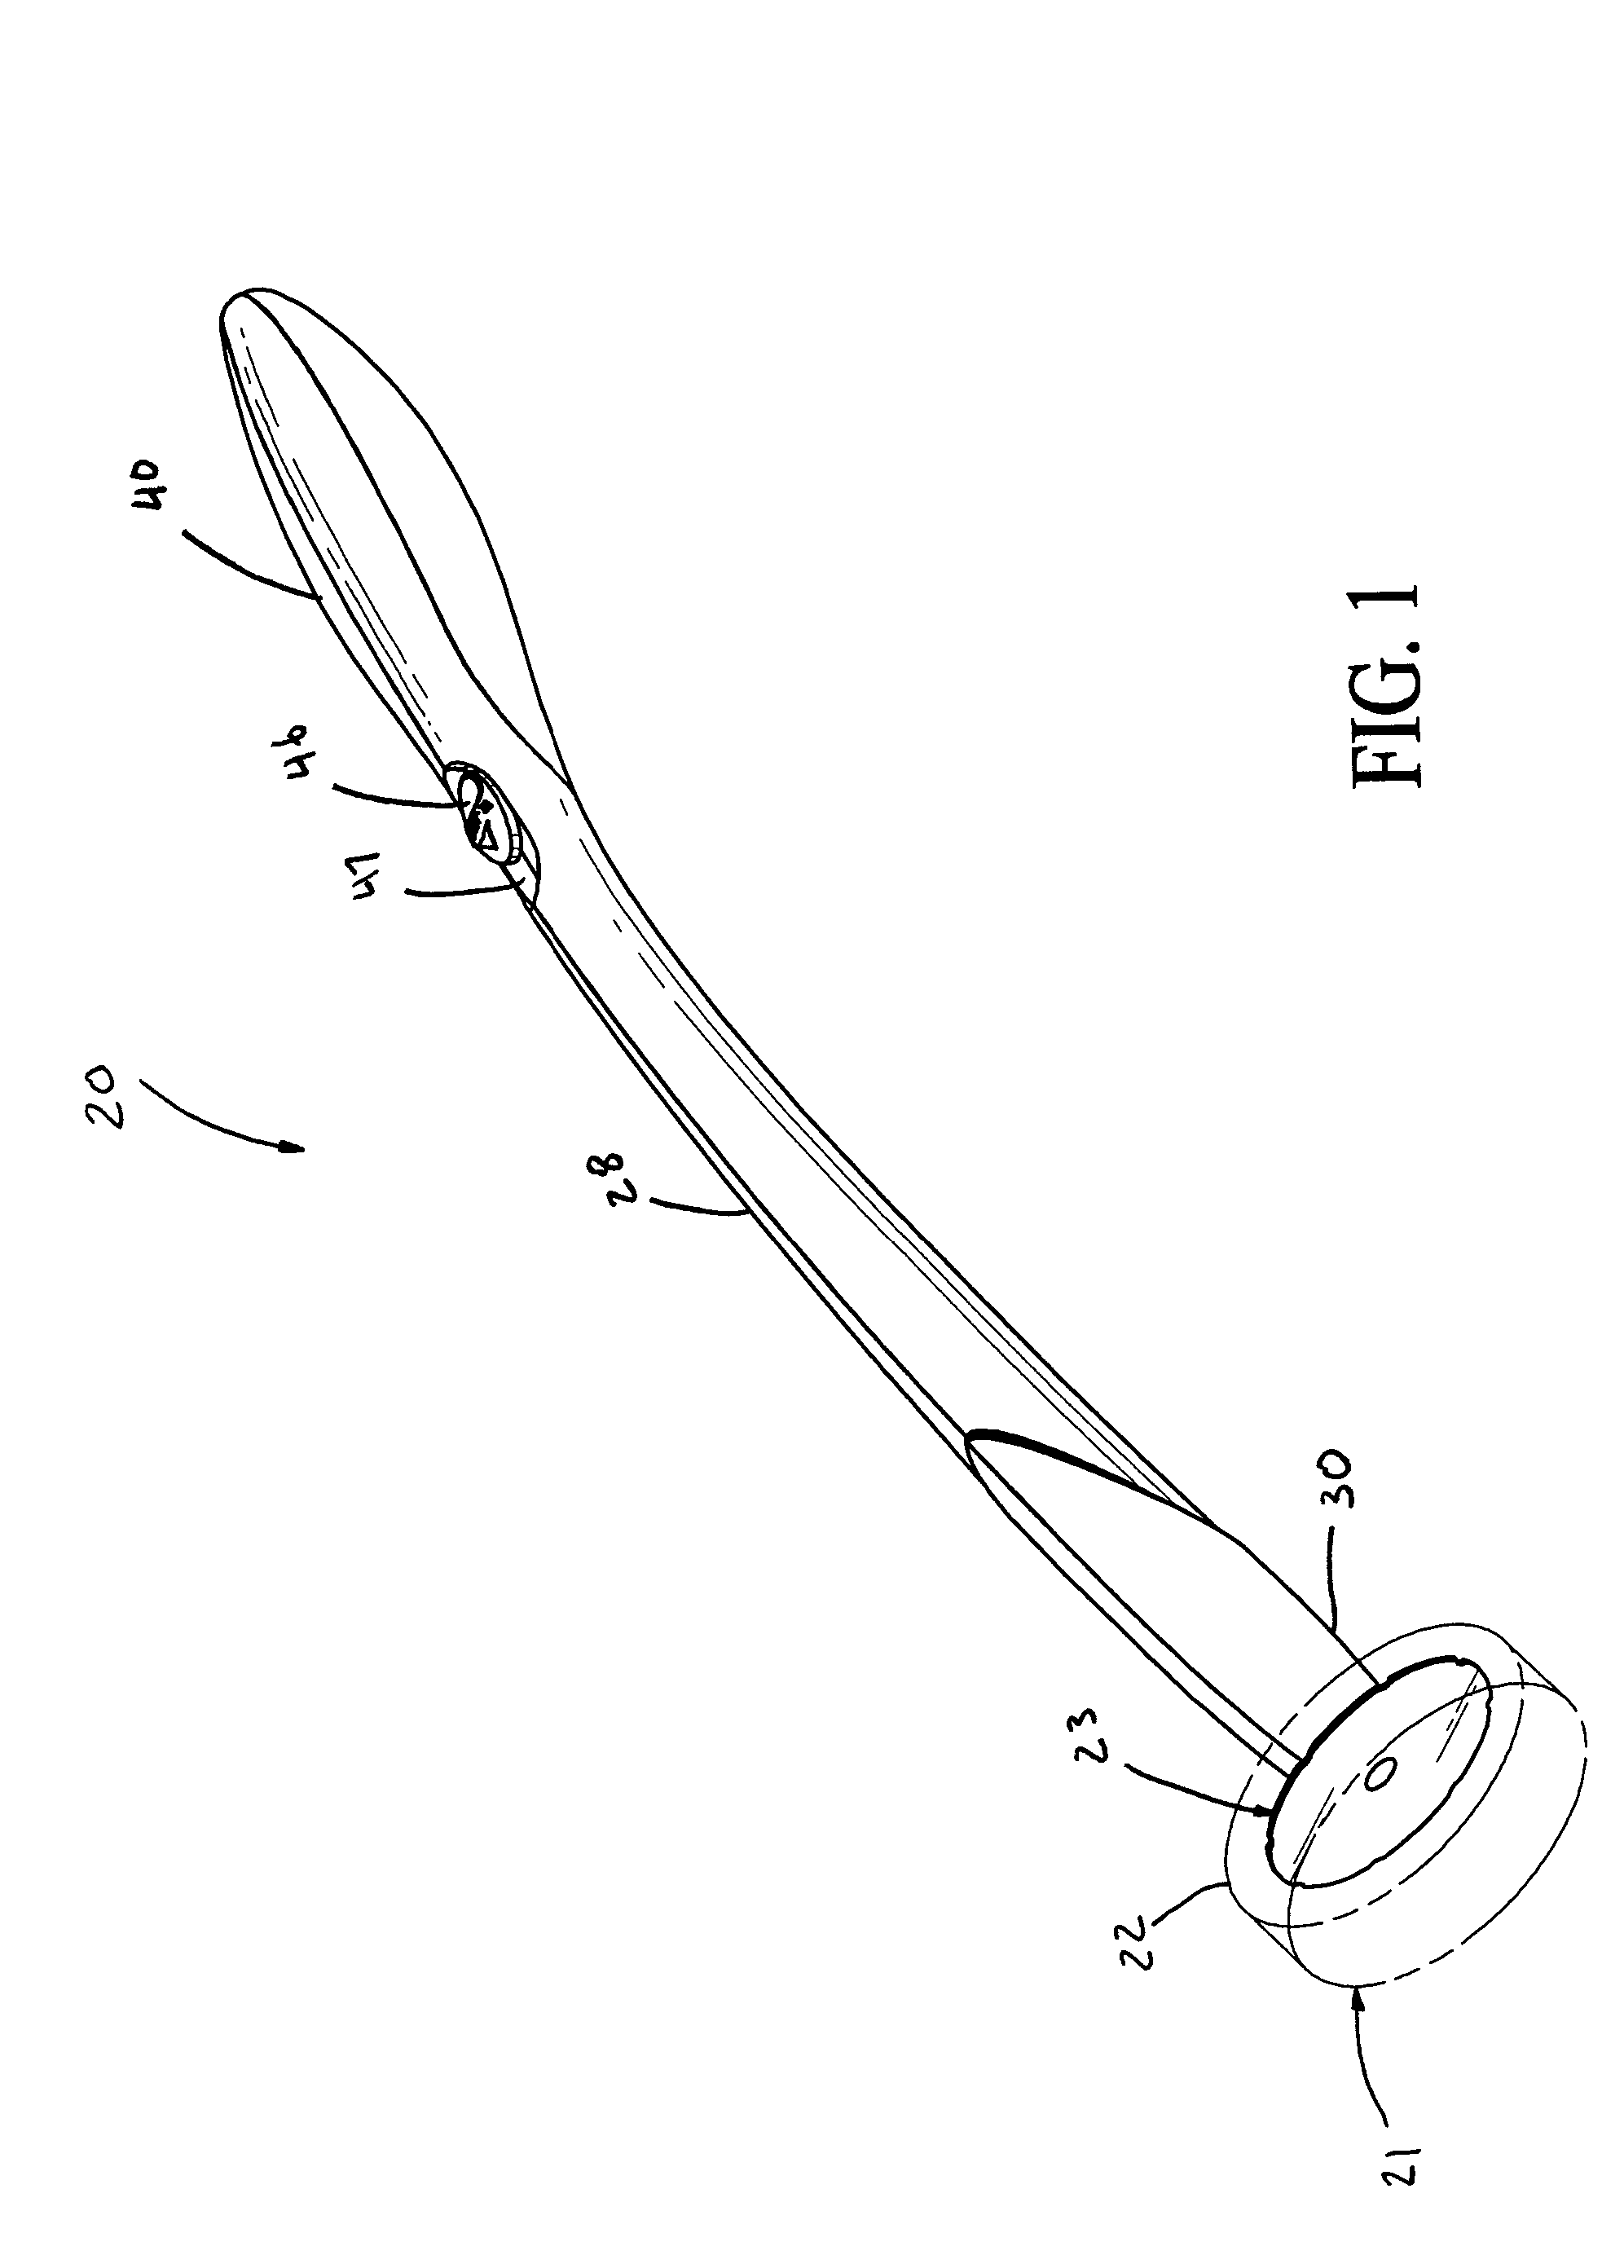 Cleaning tool assembly with a disposable cleaning implement